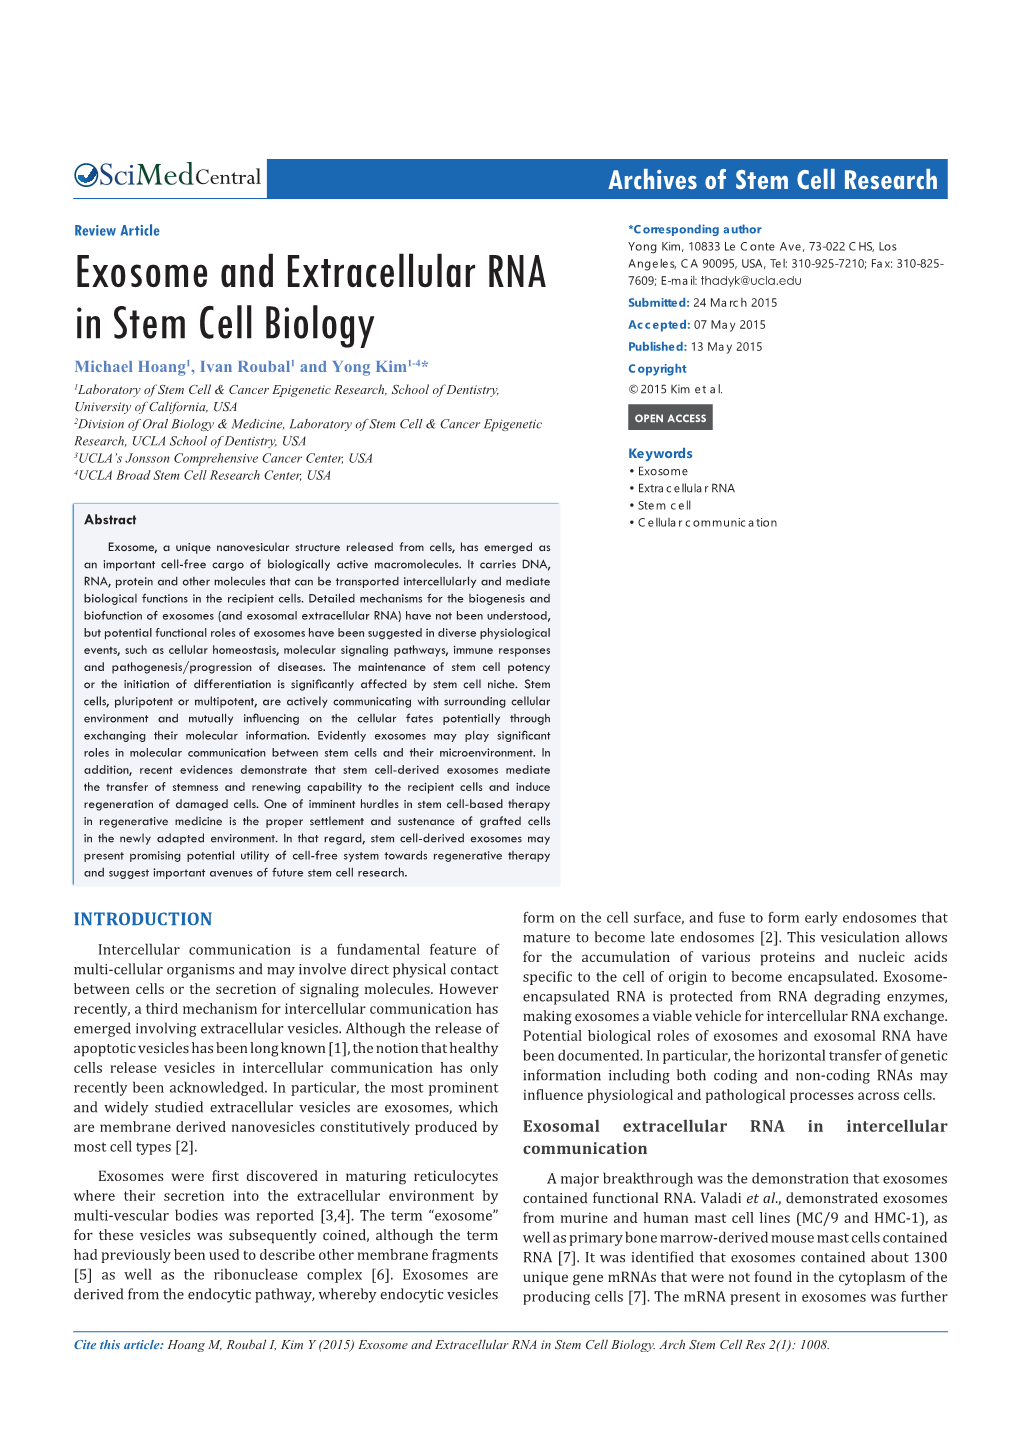 Exosome and Extracellular RNA in Stem Cell Biology